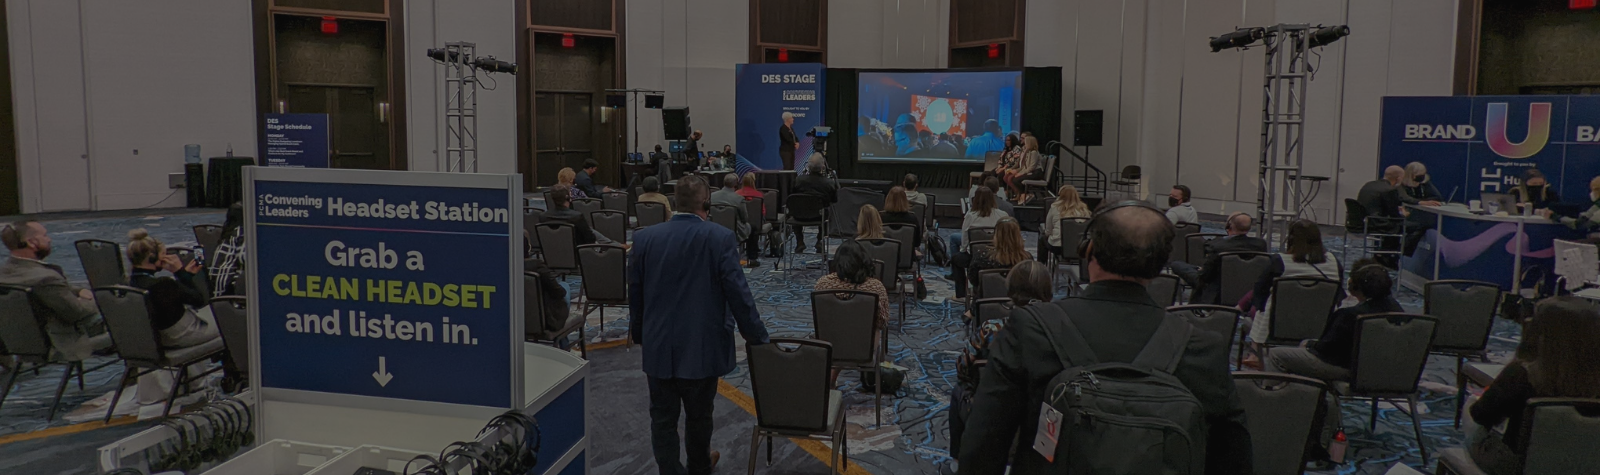 6 Tips For Mastering Hybrid Events & Trade Shows